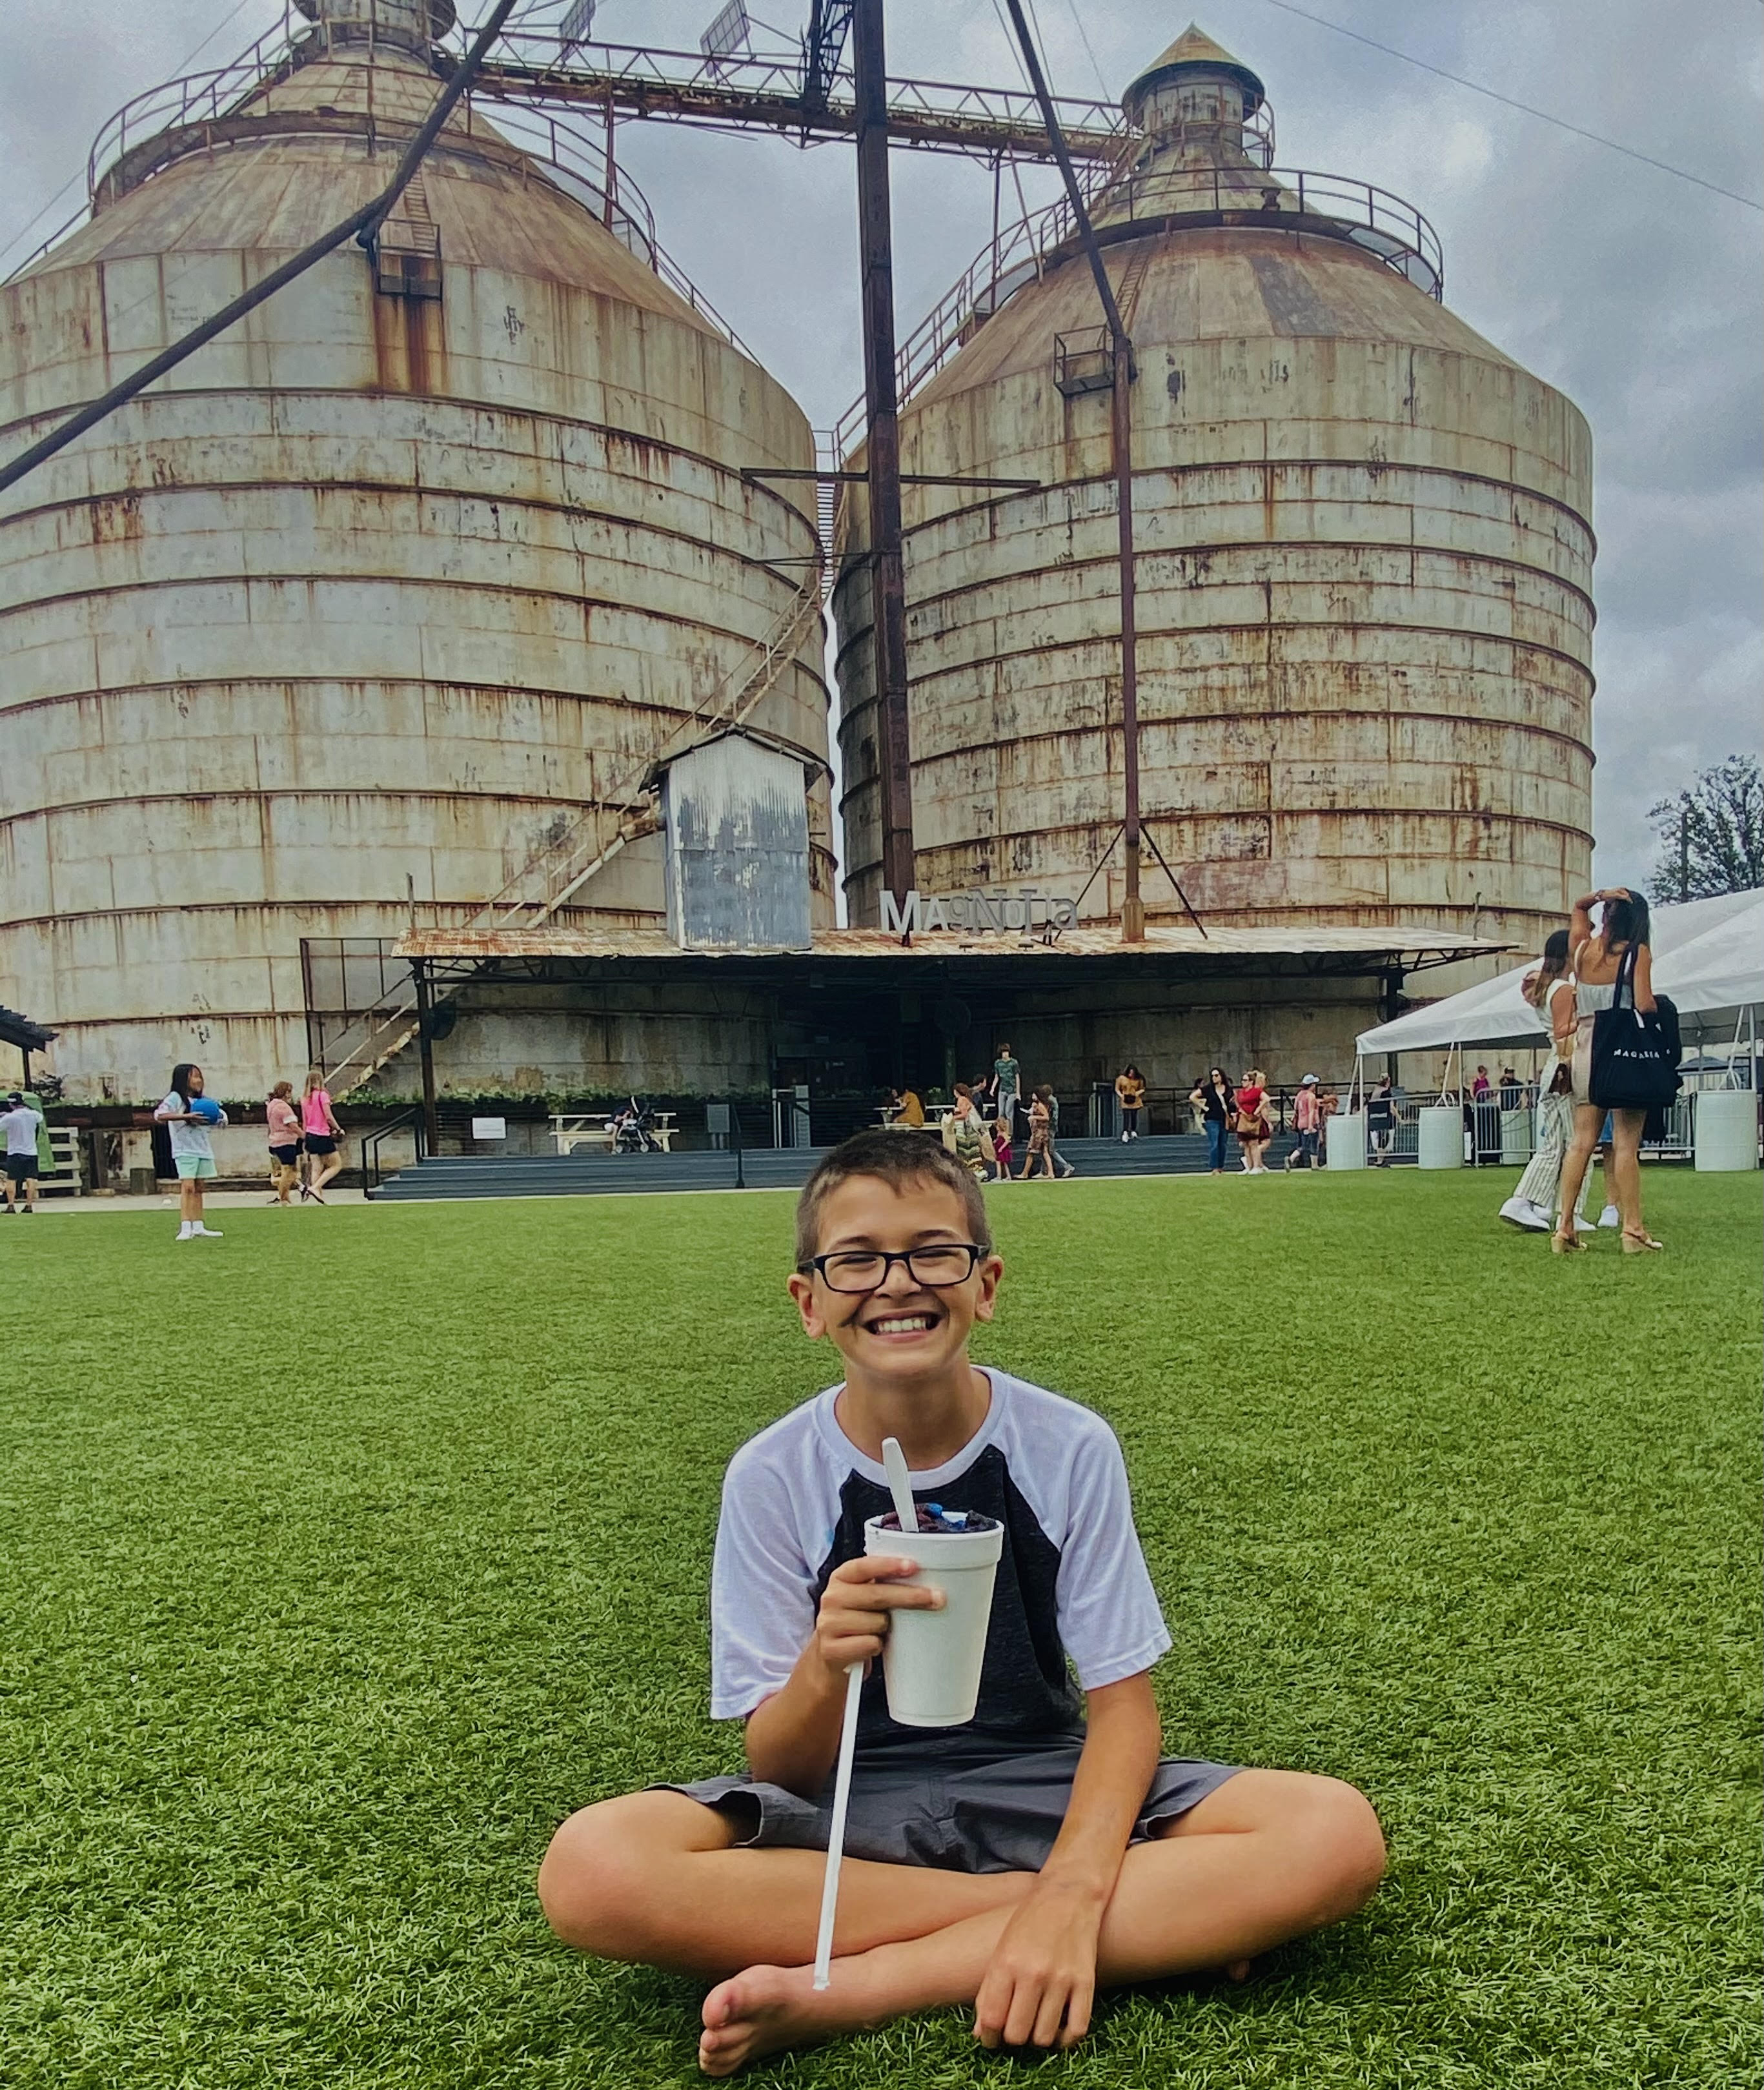 Give your older kids a little spending money to get there own food, sweets and treats while at the Magnolia Markets at the Silos in Waco, Tx